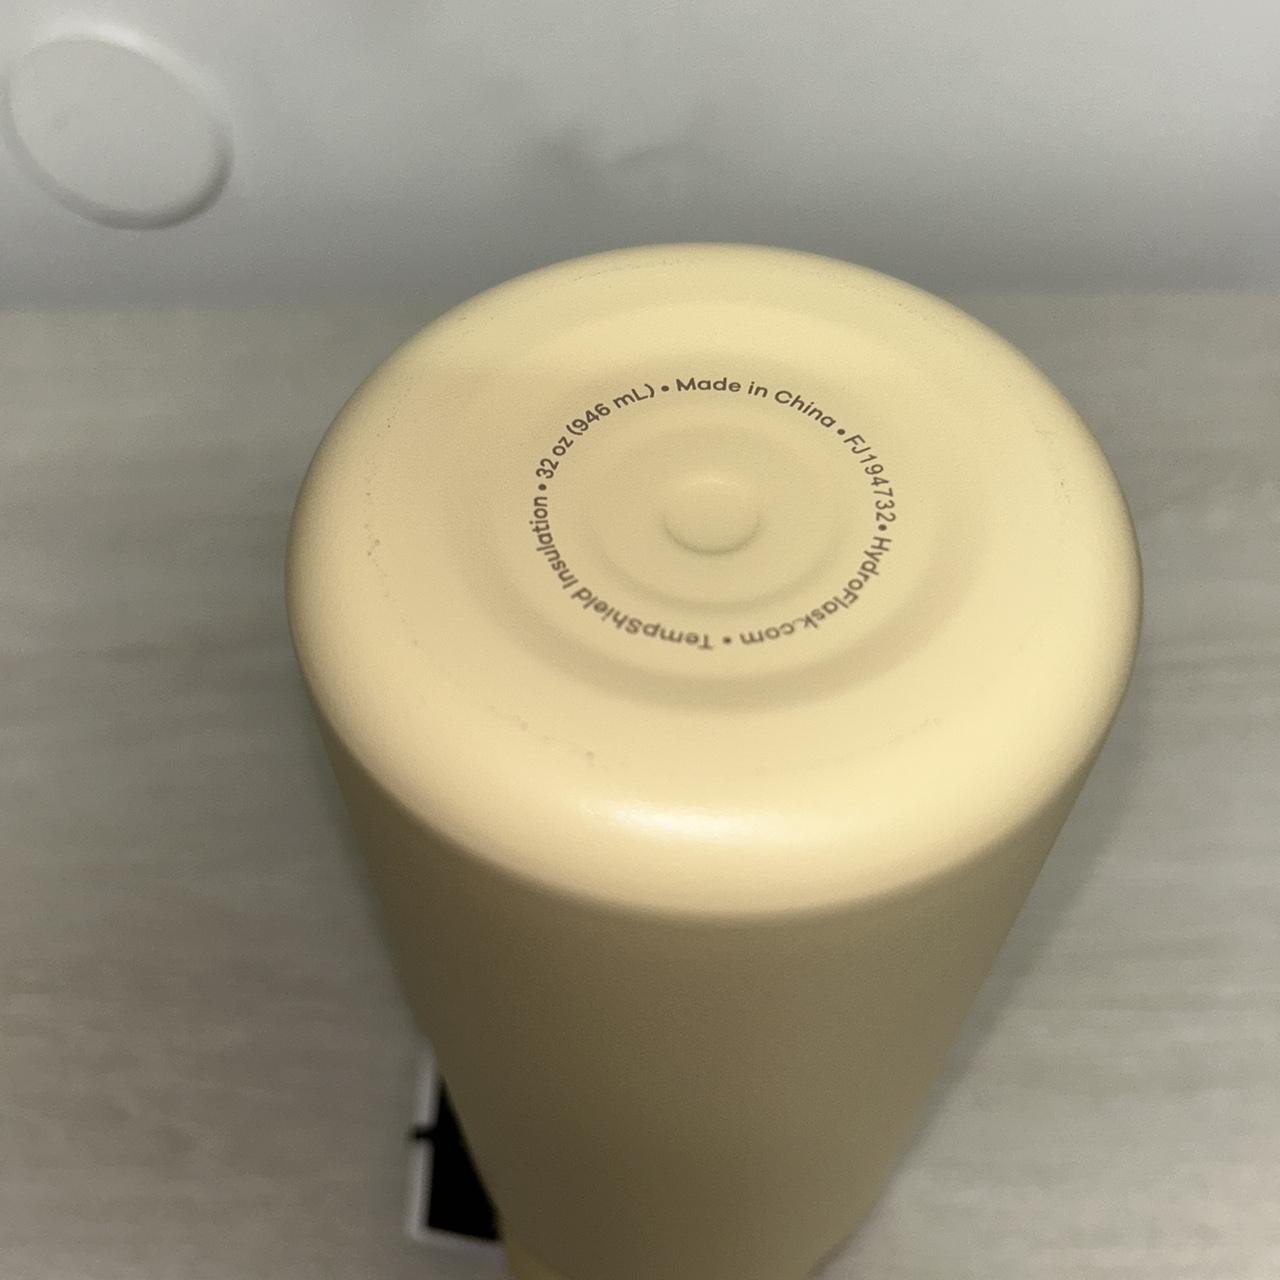 Baby sky blue hydro flask, fair condition, flaws as - Depop